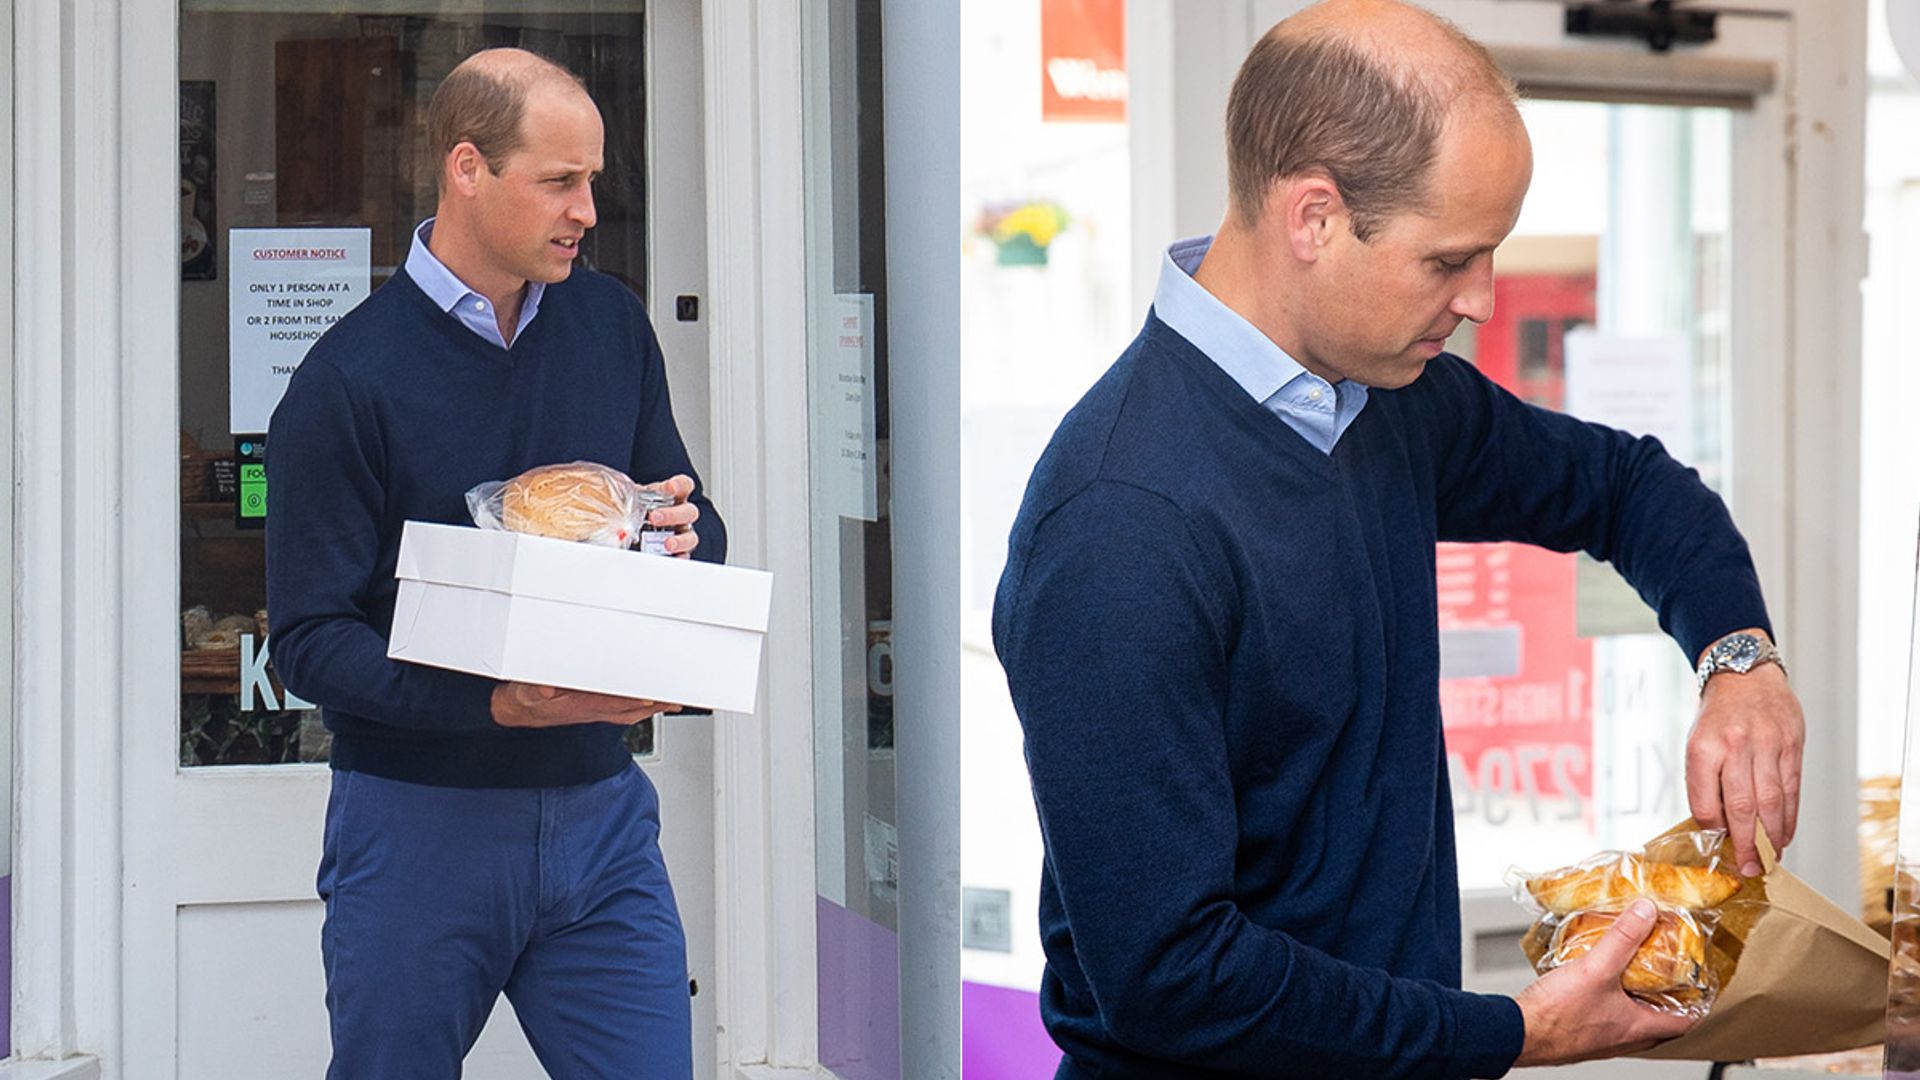 prince william at bakery